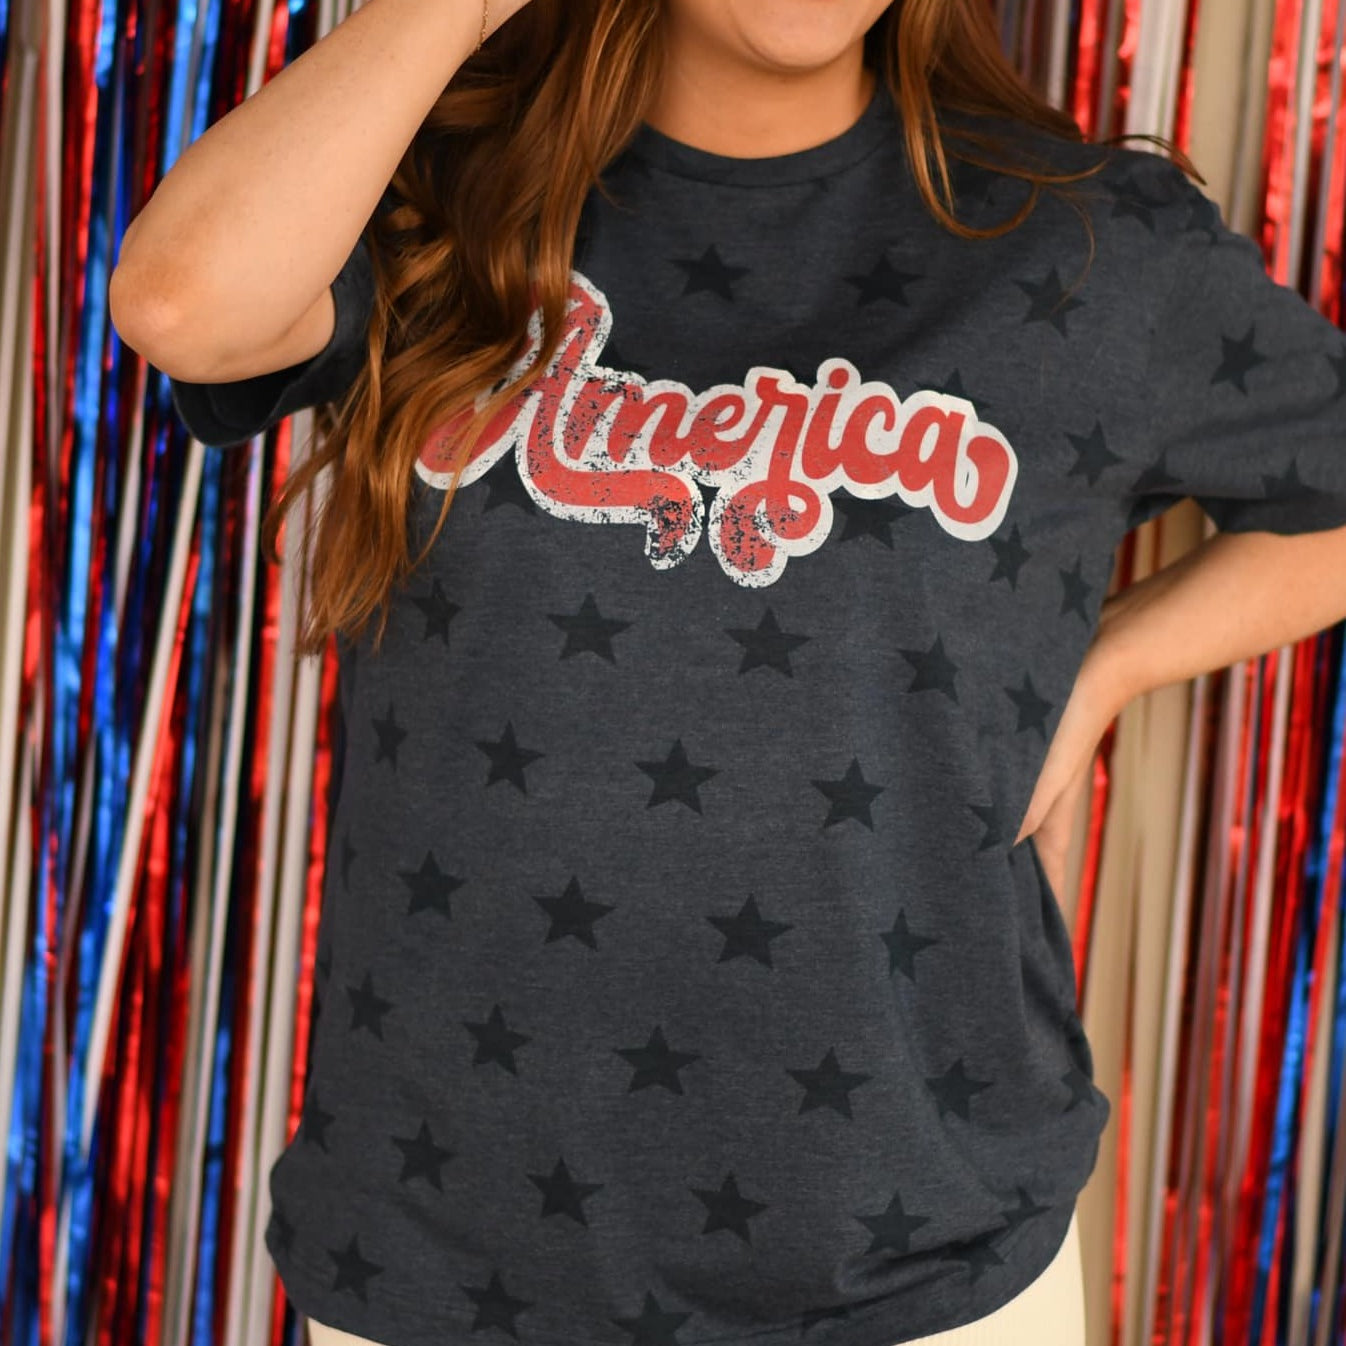 Vintage AMERICA Navy Star Tee-Graphic Tee-LouisGeorge Boutique-LouisGeorge Boutique, Women’s Fashion Boutique Located in Trussville, Alabama